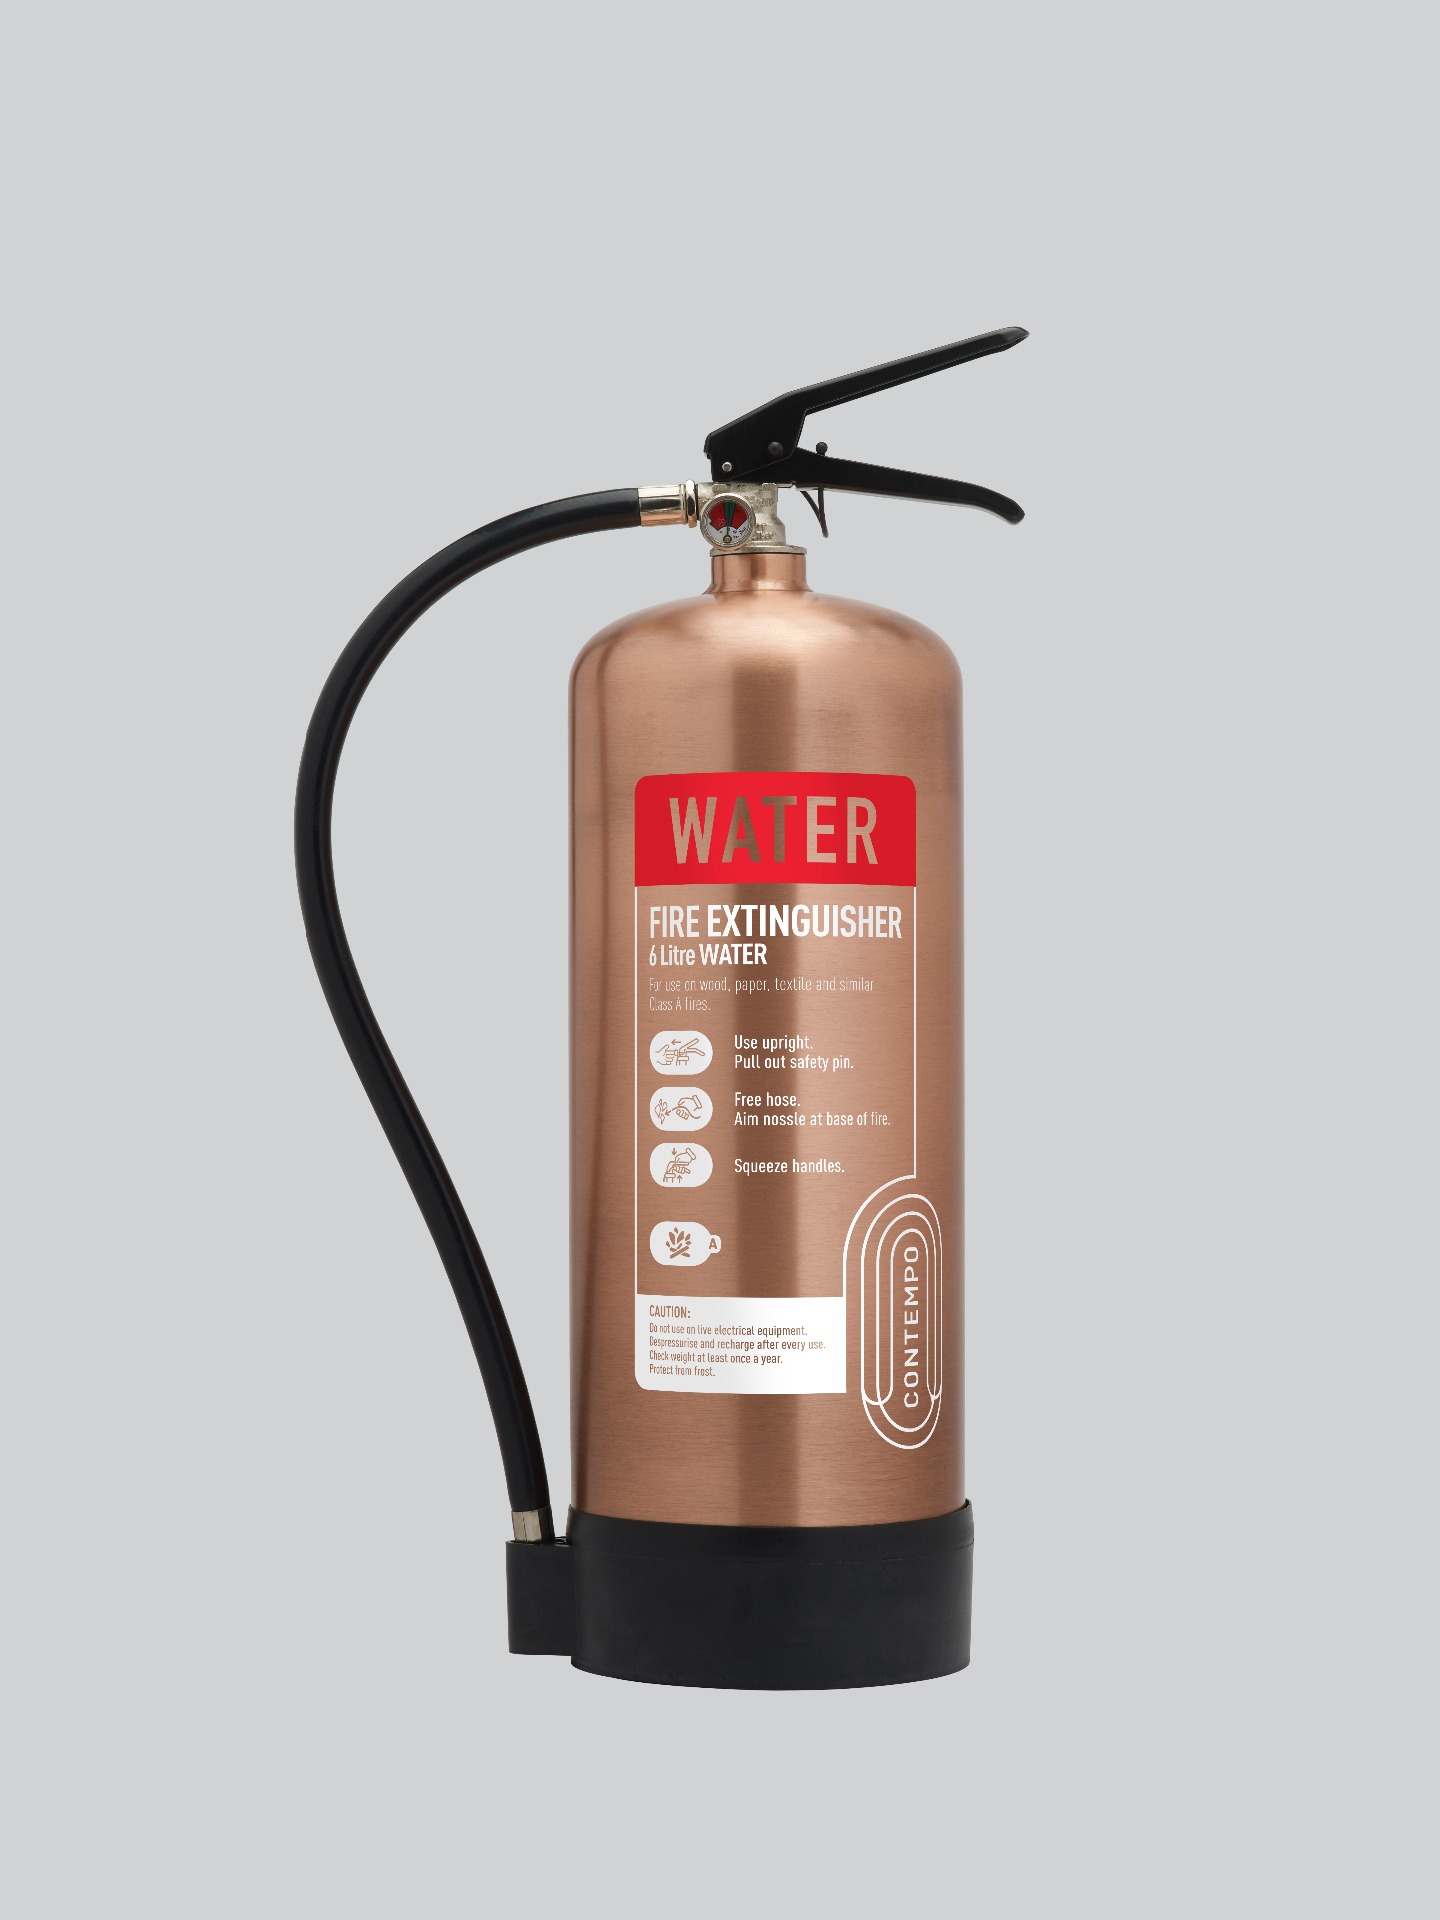 Midland Fire - First Class Range - 9 Litre Water with a polished copper finish